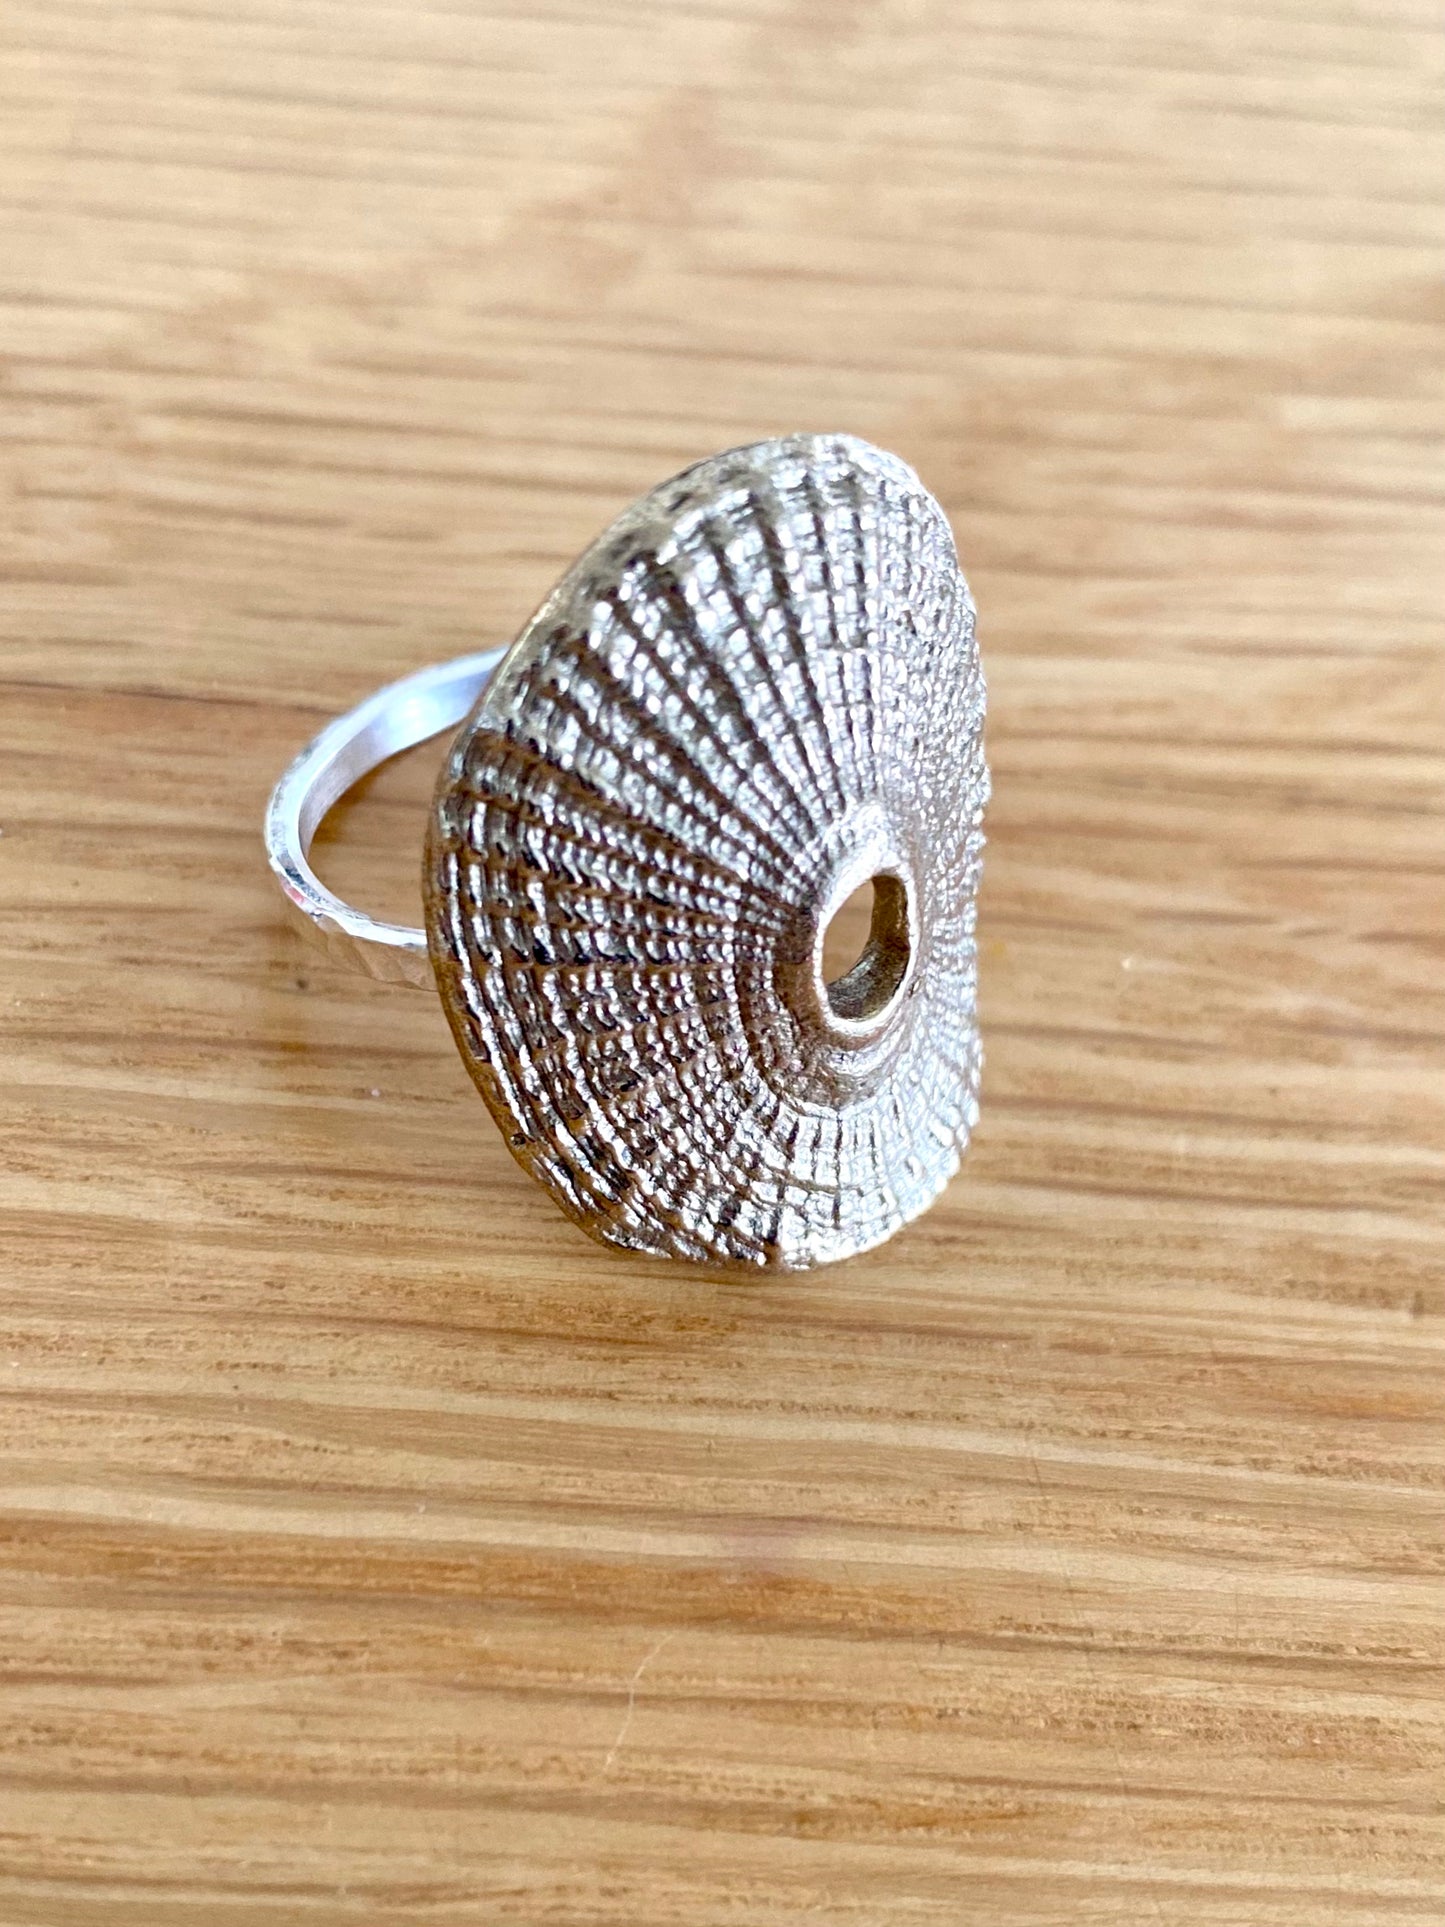 Silver textured shell ring placed on a wooden surface, showcasing detailed craftsmanship